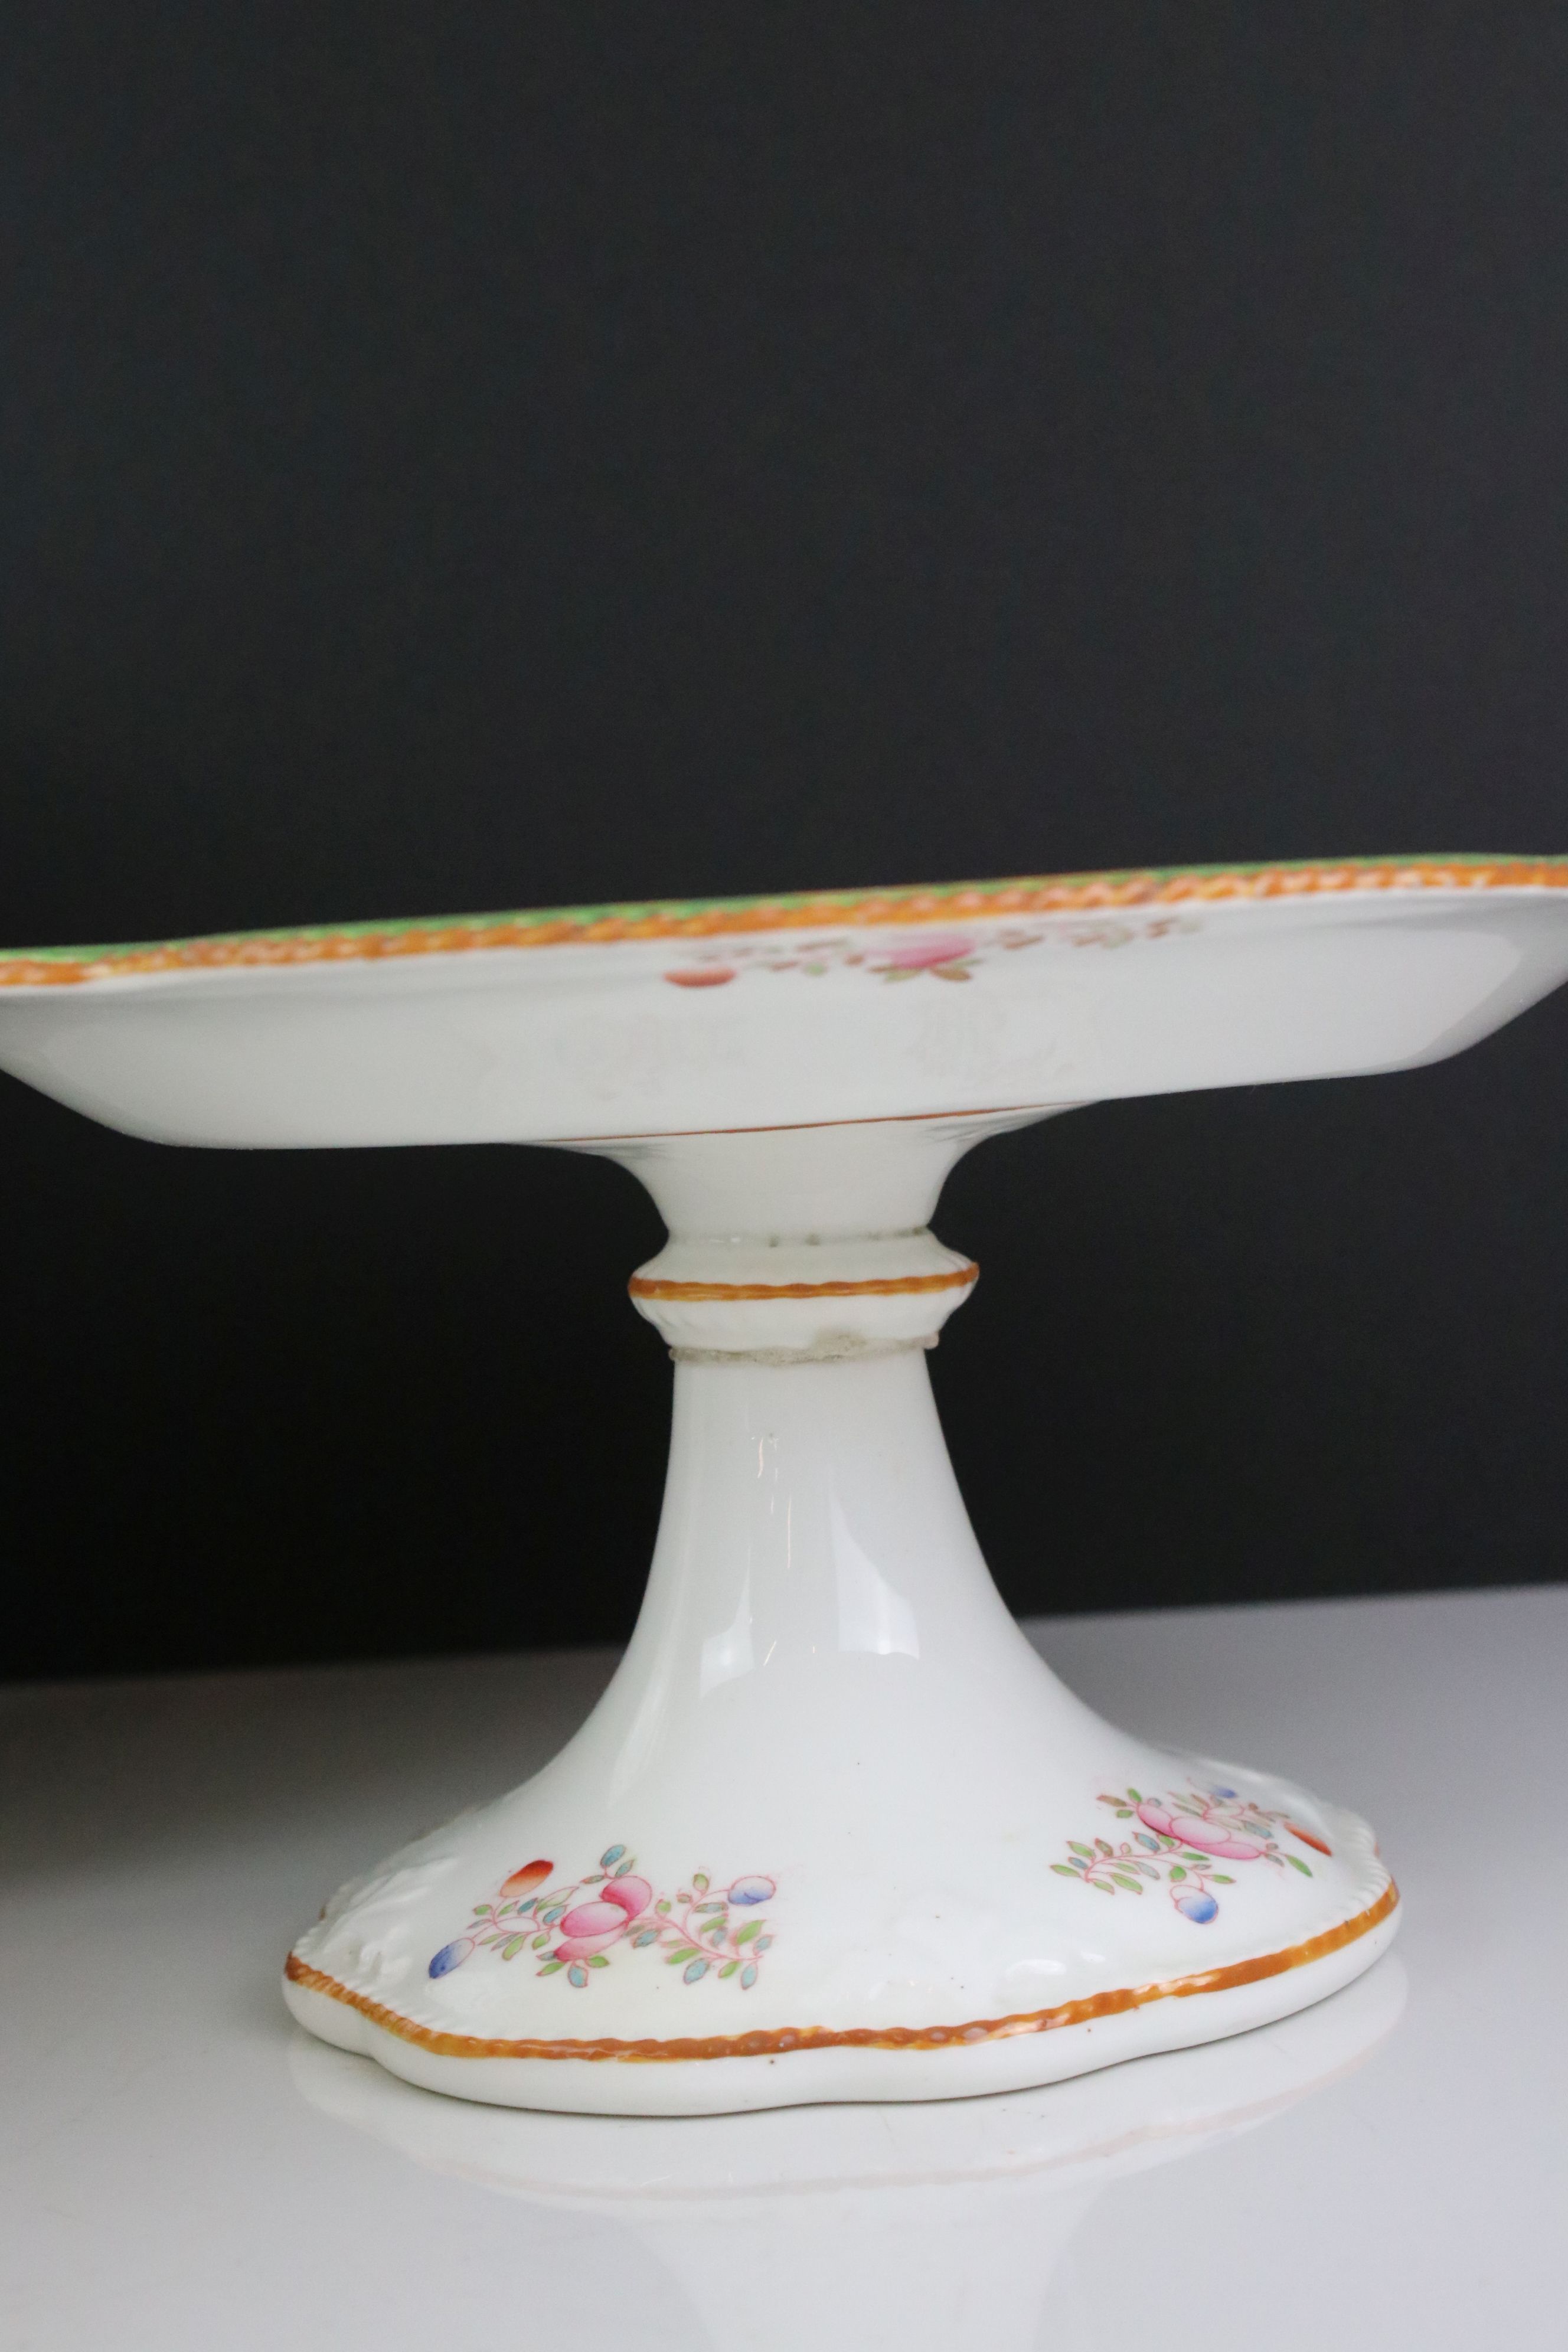 Early 20th century William A Adderley & Co ' Cuckoo ' Dessert Set comprising Comport, Two Bowls - Image 7 of 11